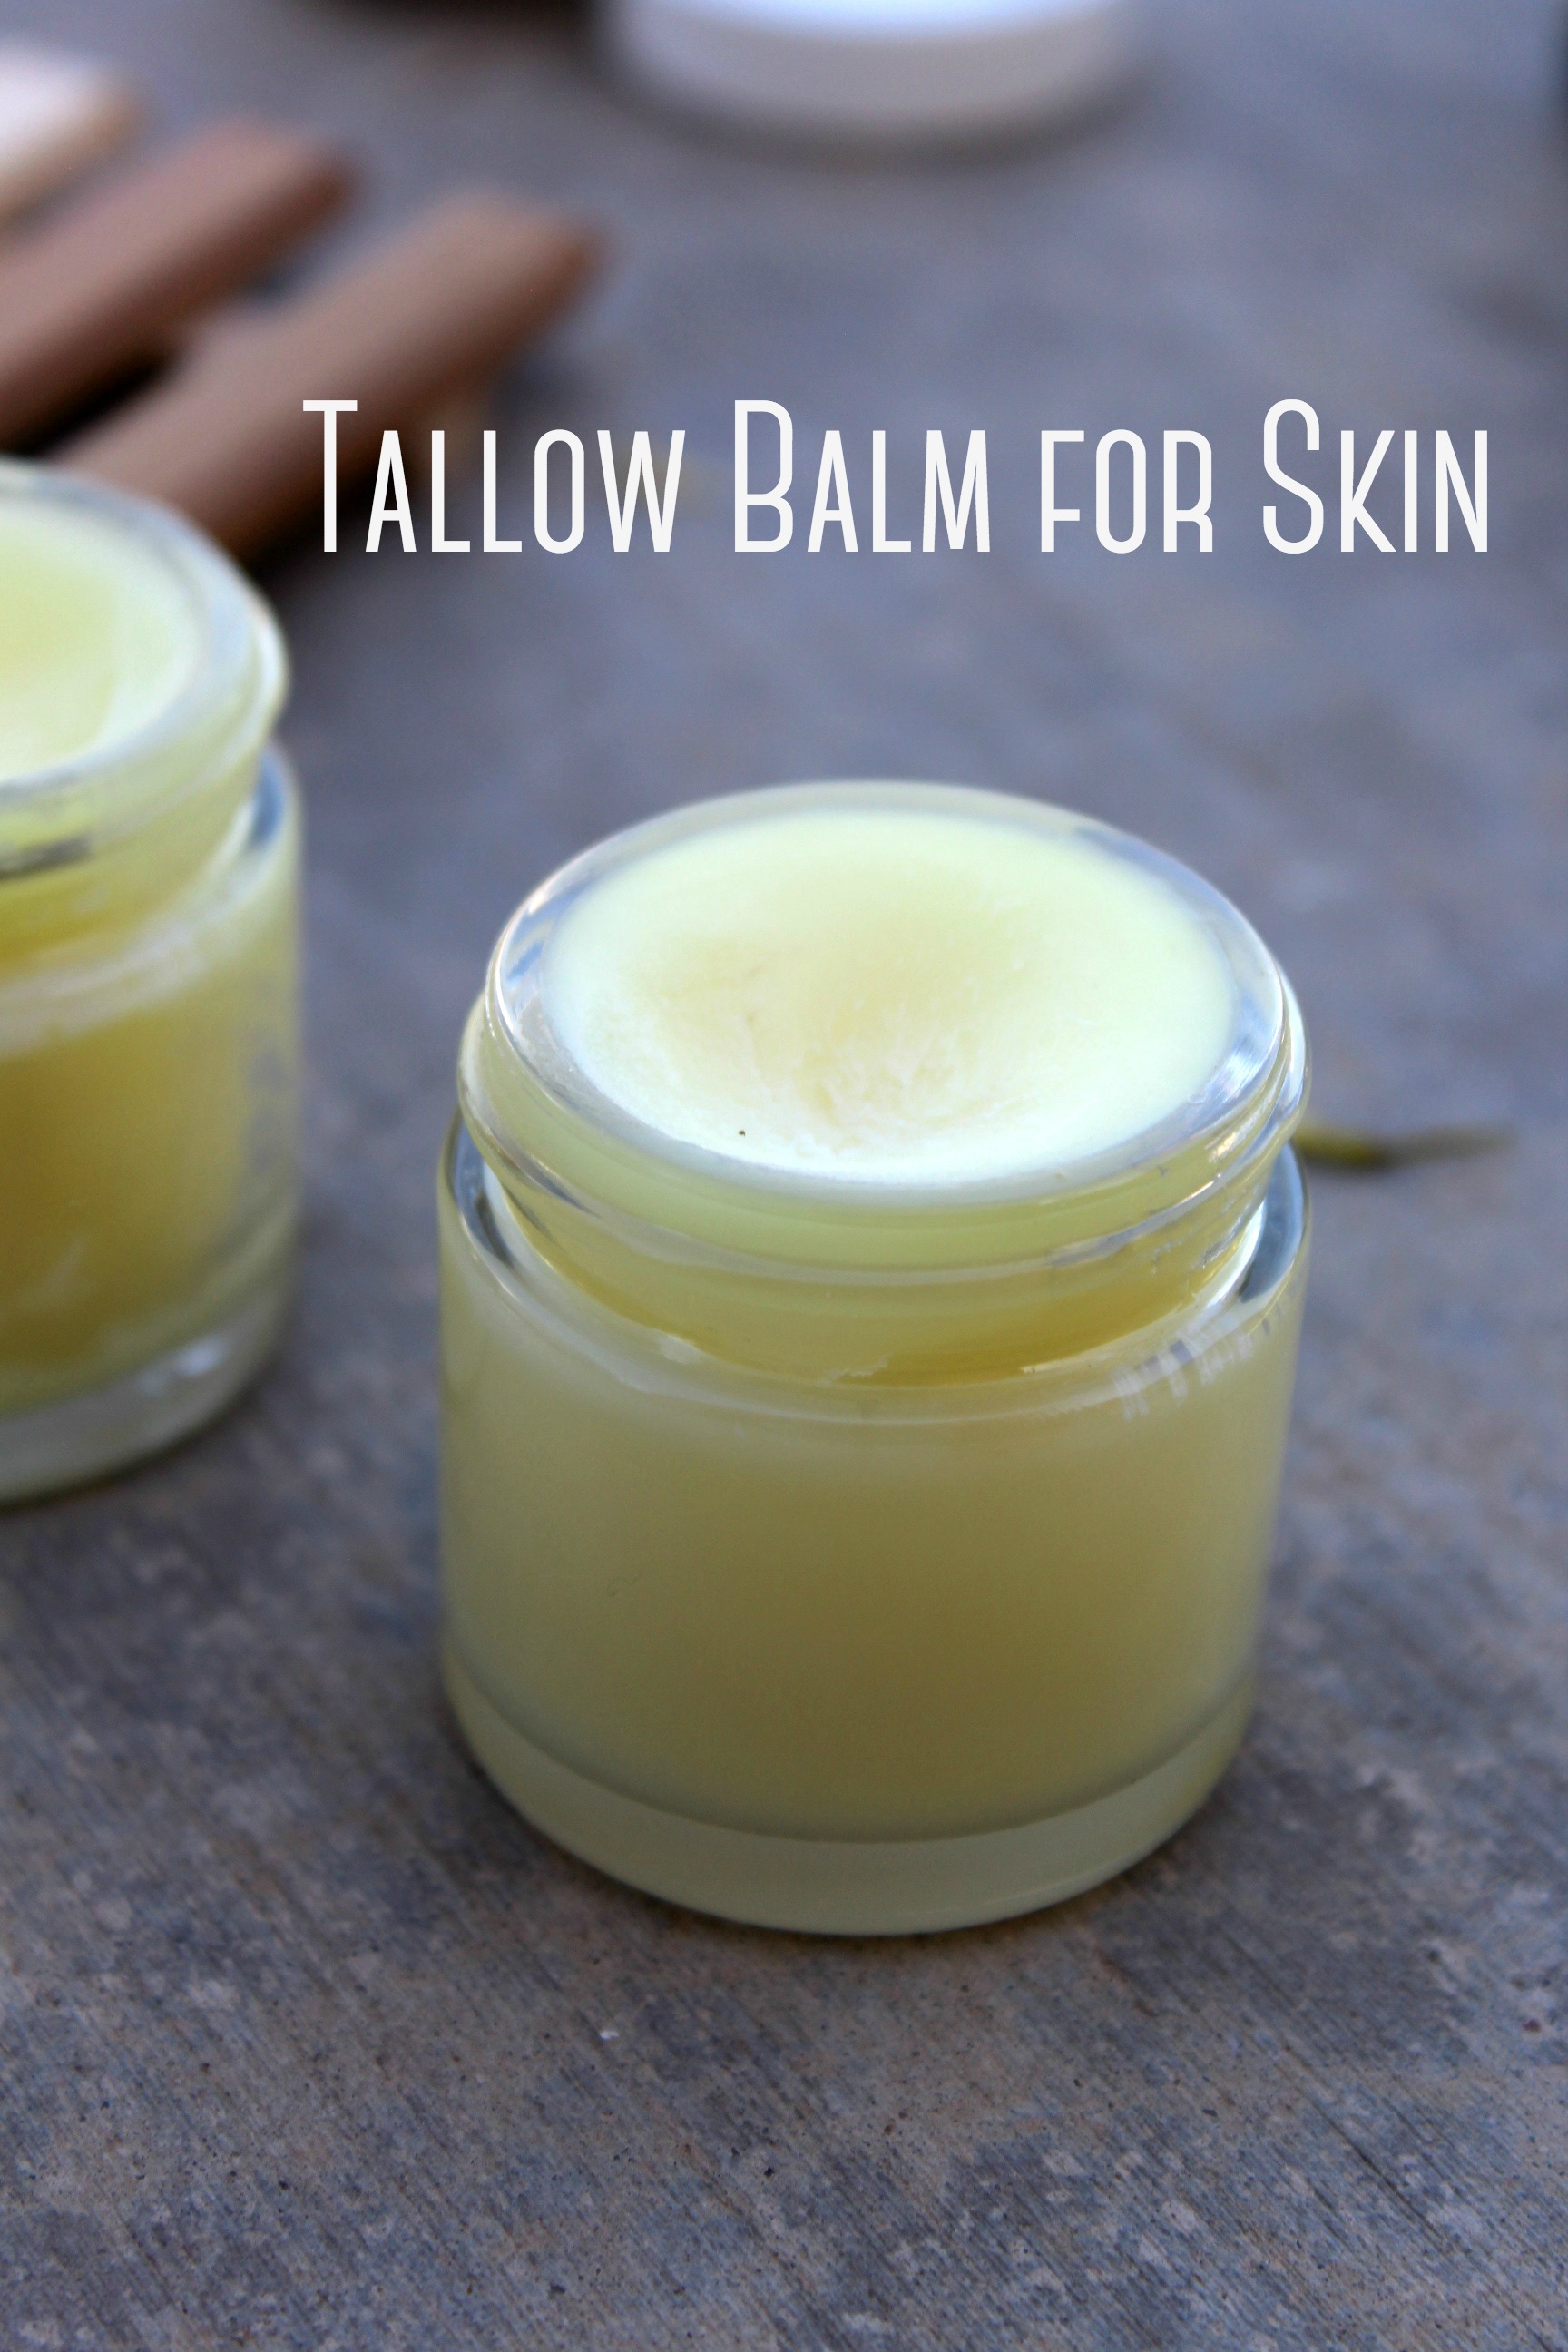 Tallow balm is a whole body, natural skincare for hands, face, feet and body. Rich in vitamins A, D, K, E and omega 3's, it provides soothing skin relief naturally.  #tallow #tallowbalm #skincare #beauty